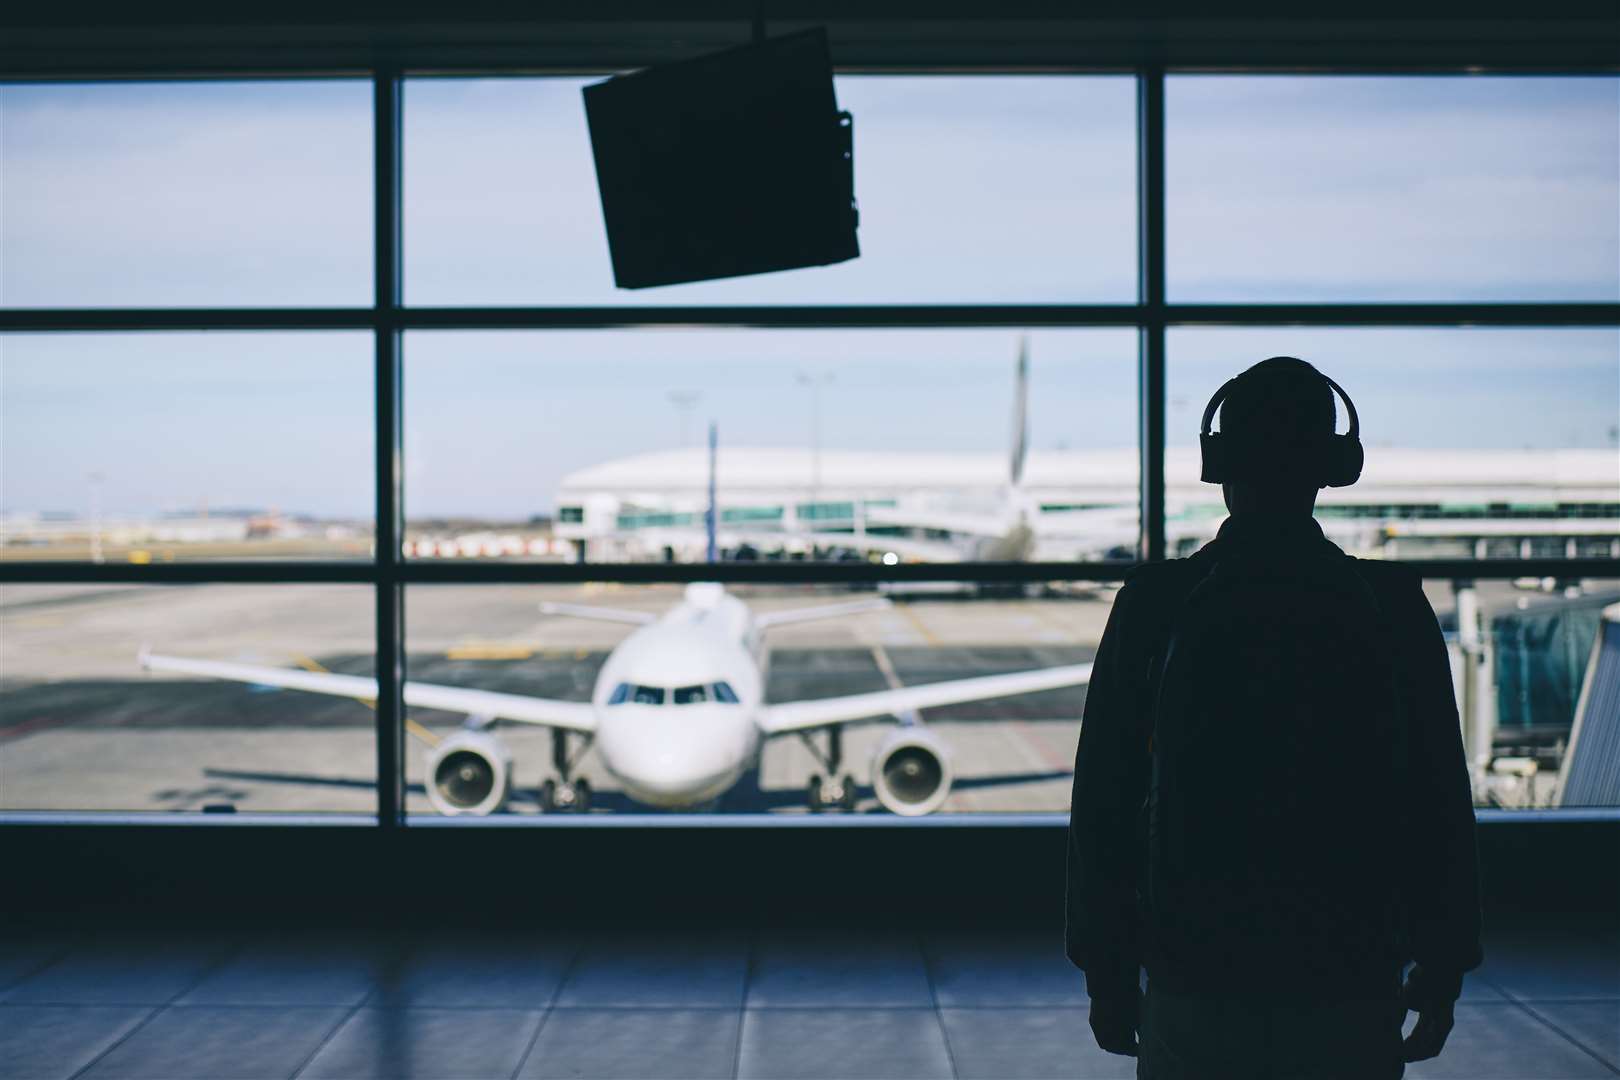 Travellers flying back to the UK may need to contend with different rules at their departure airport abroad. Image: iStock.